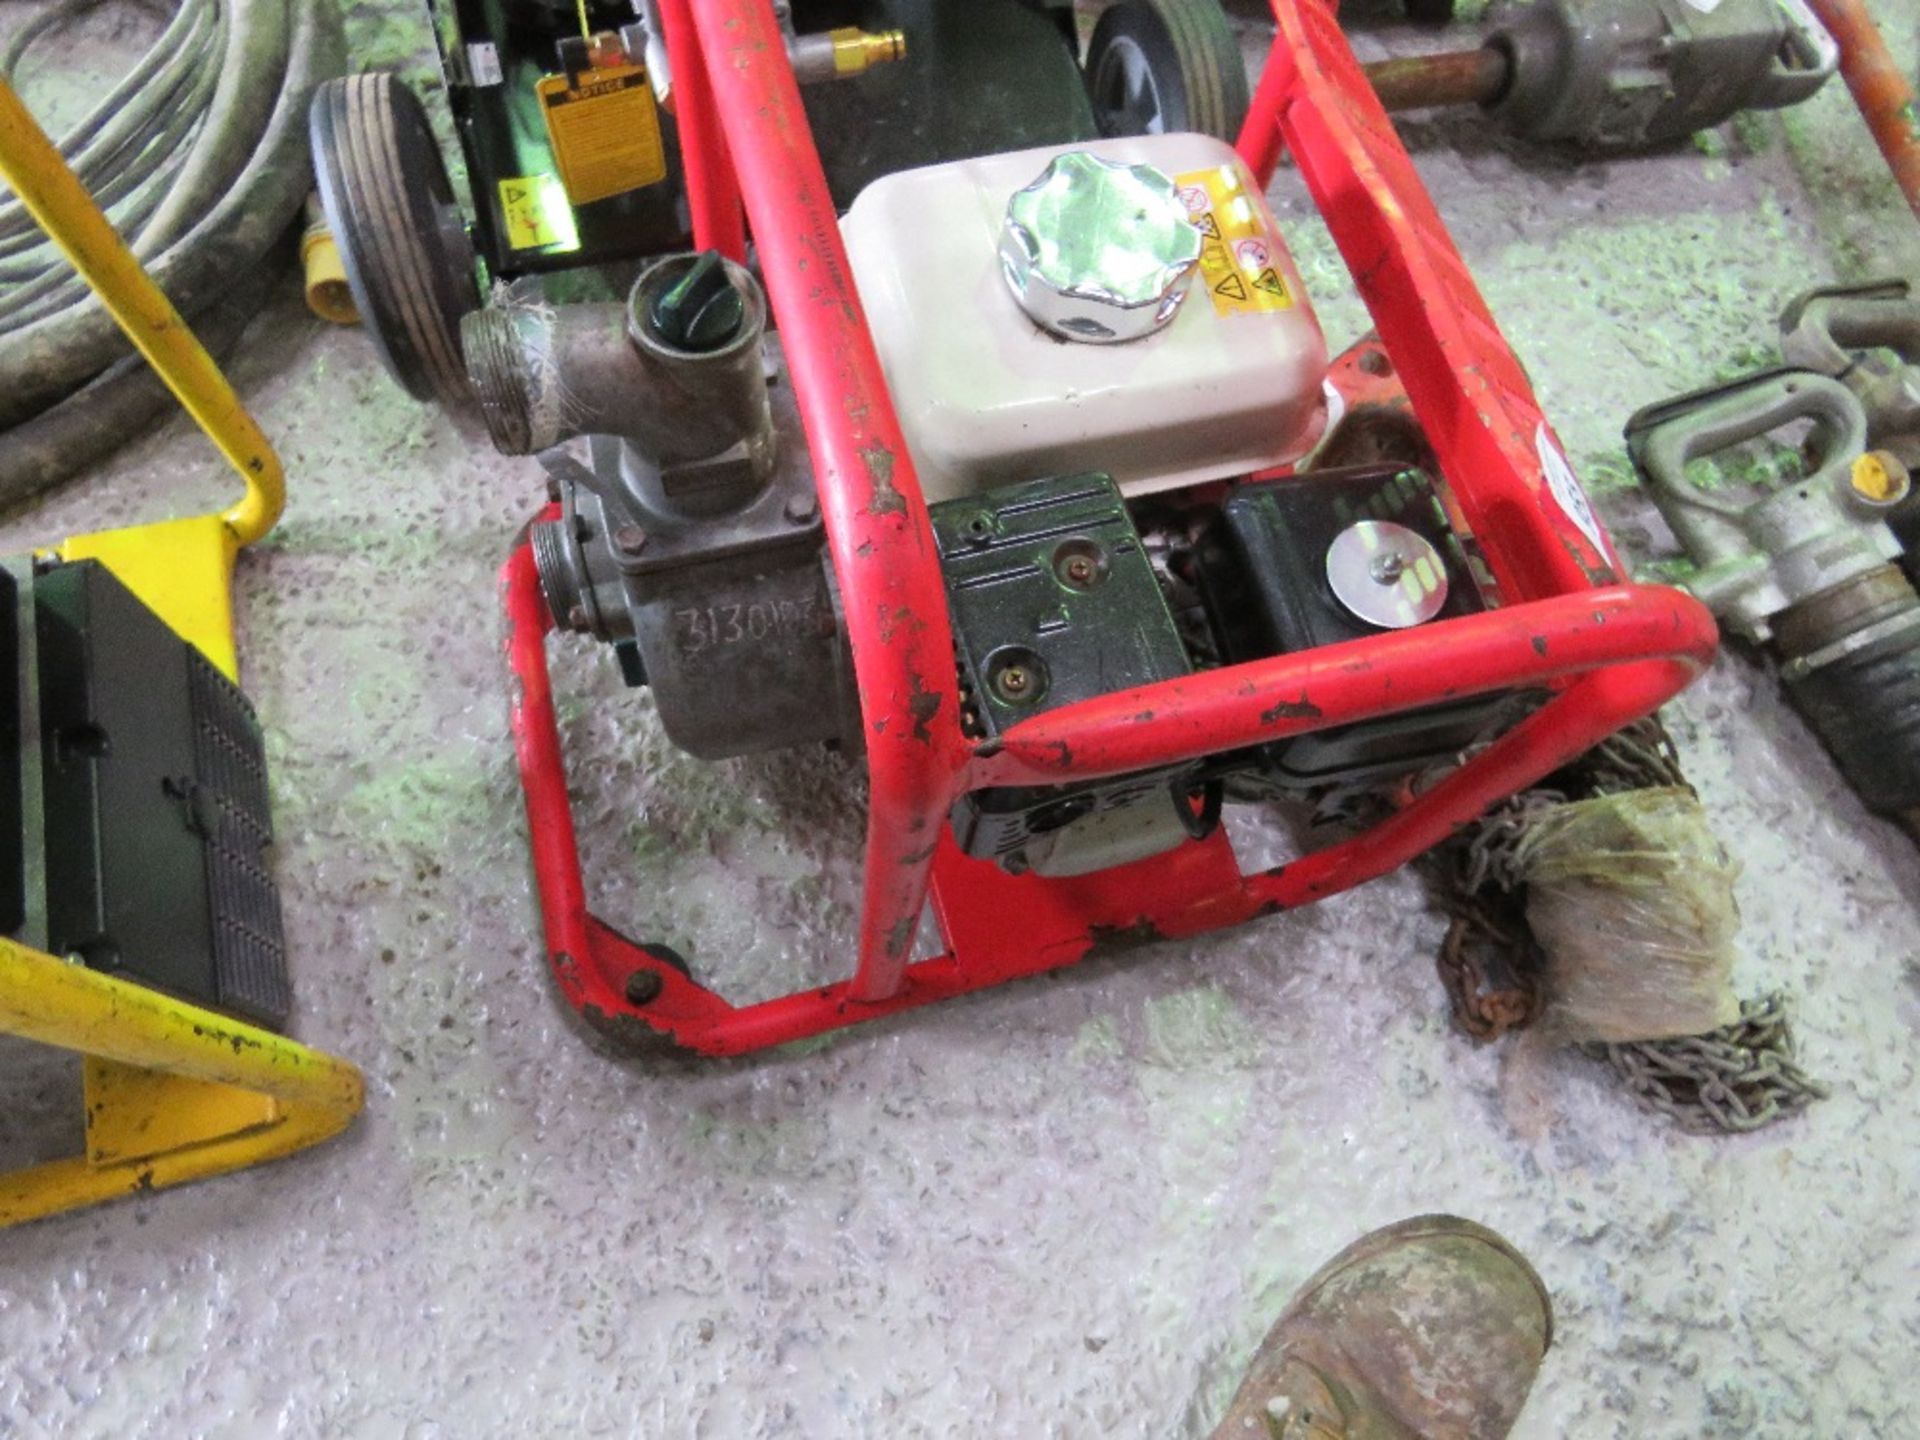 HILTA PETROL ENGINED WATER PUMP. - Image 2 of 2